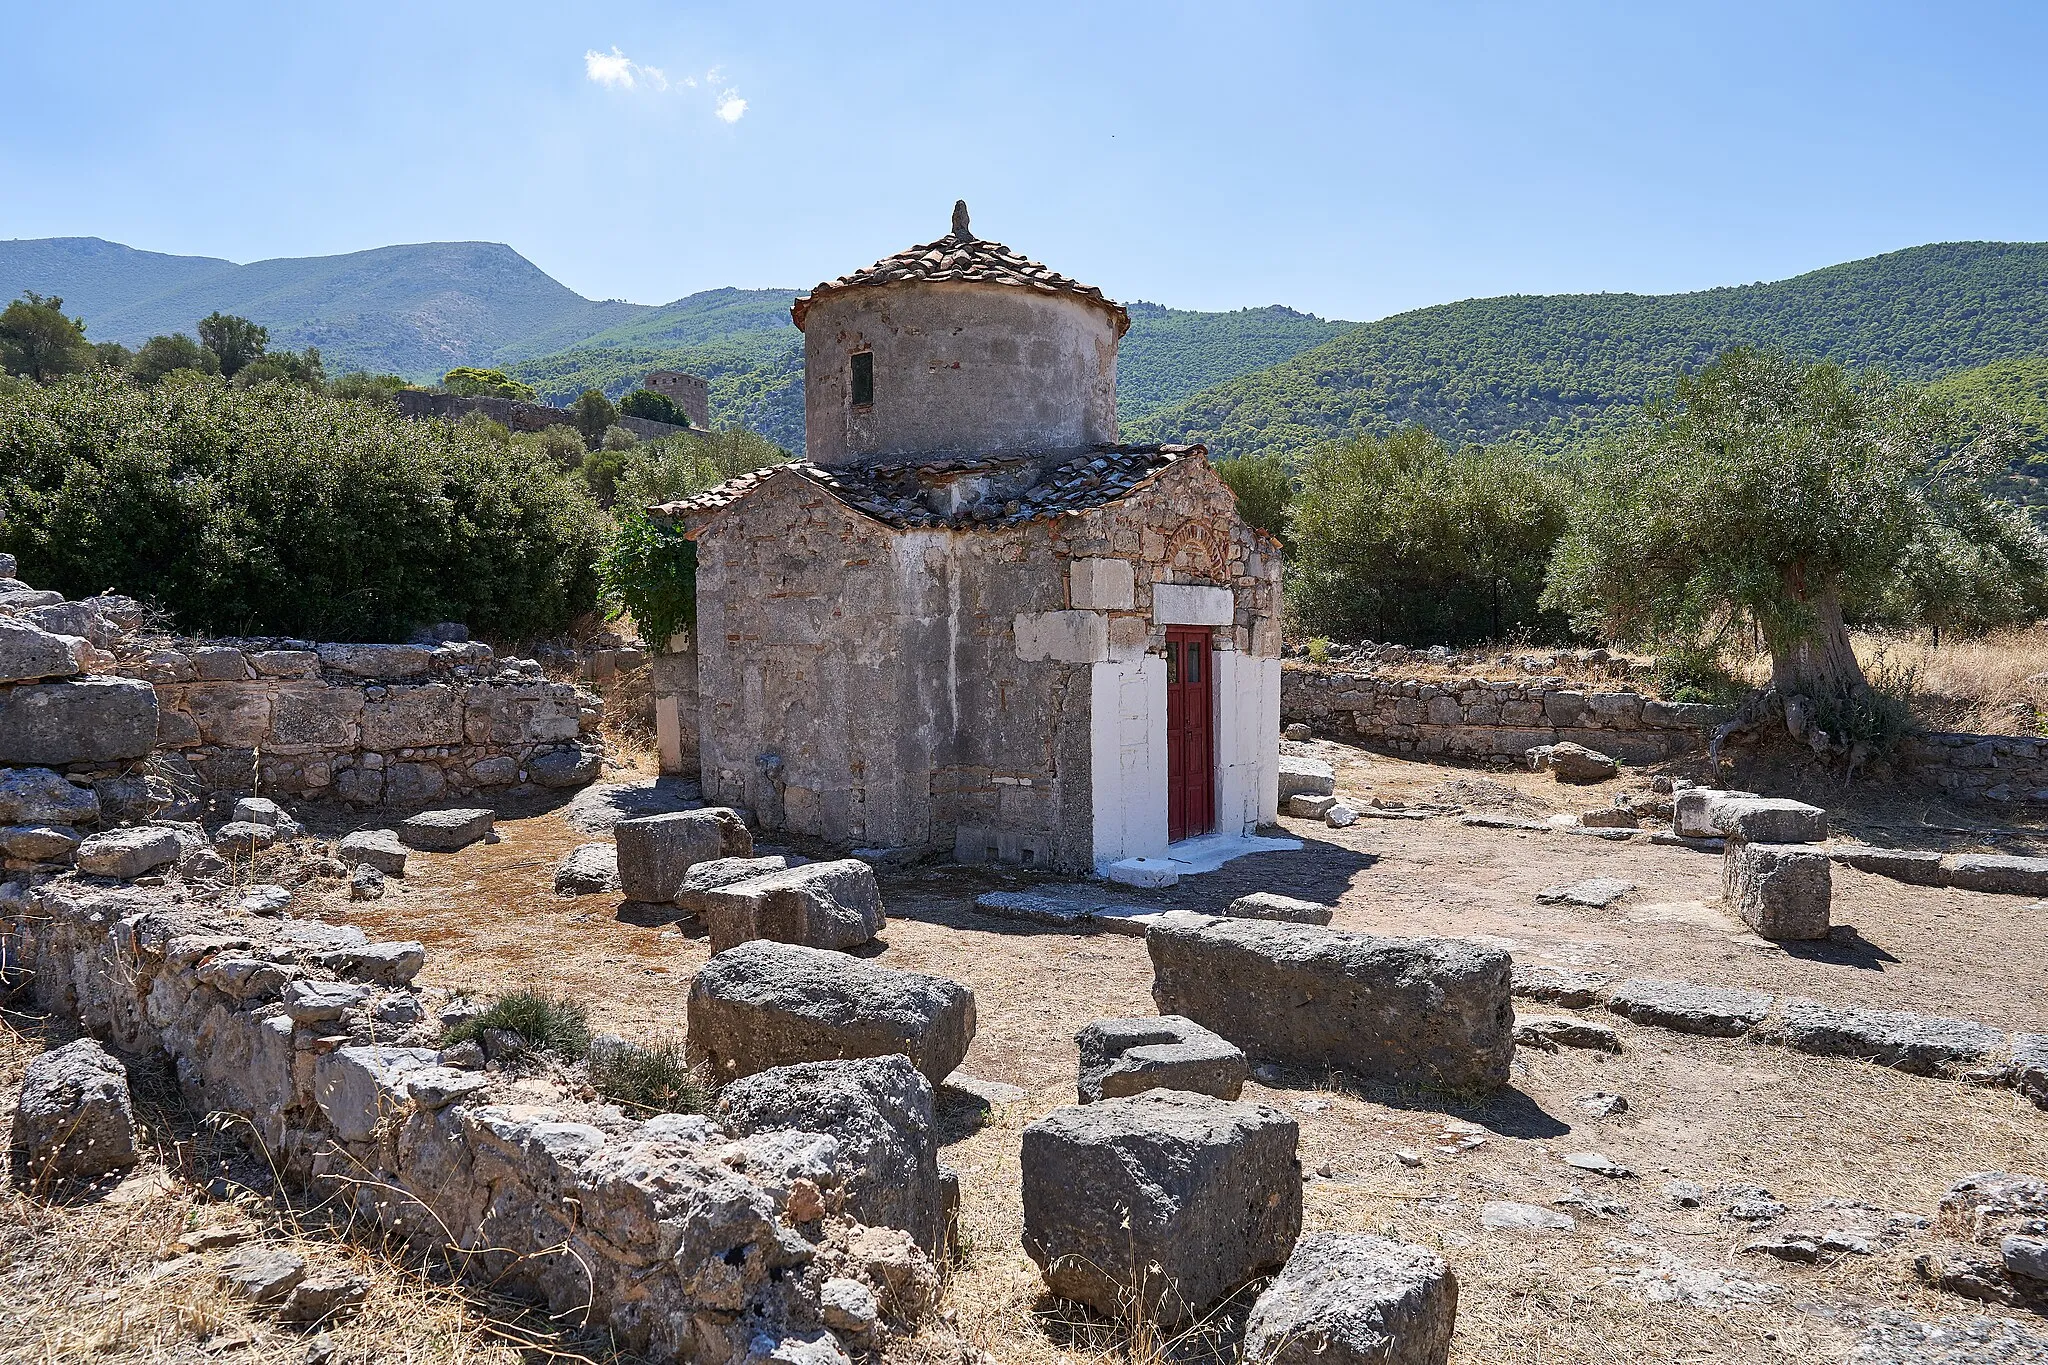 Photo showing: The 11th century Church of Theotokos (Virgin Mary) or Saint Anne in Aigosthena (Porto Germeno) on August 27, 2020. It has been built over the ruins of a 5th century Early Christian Basilica. Megaris, Greece.